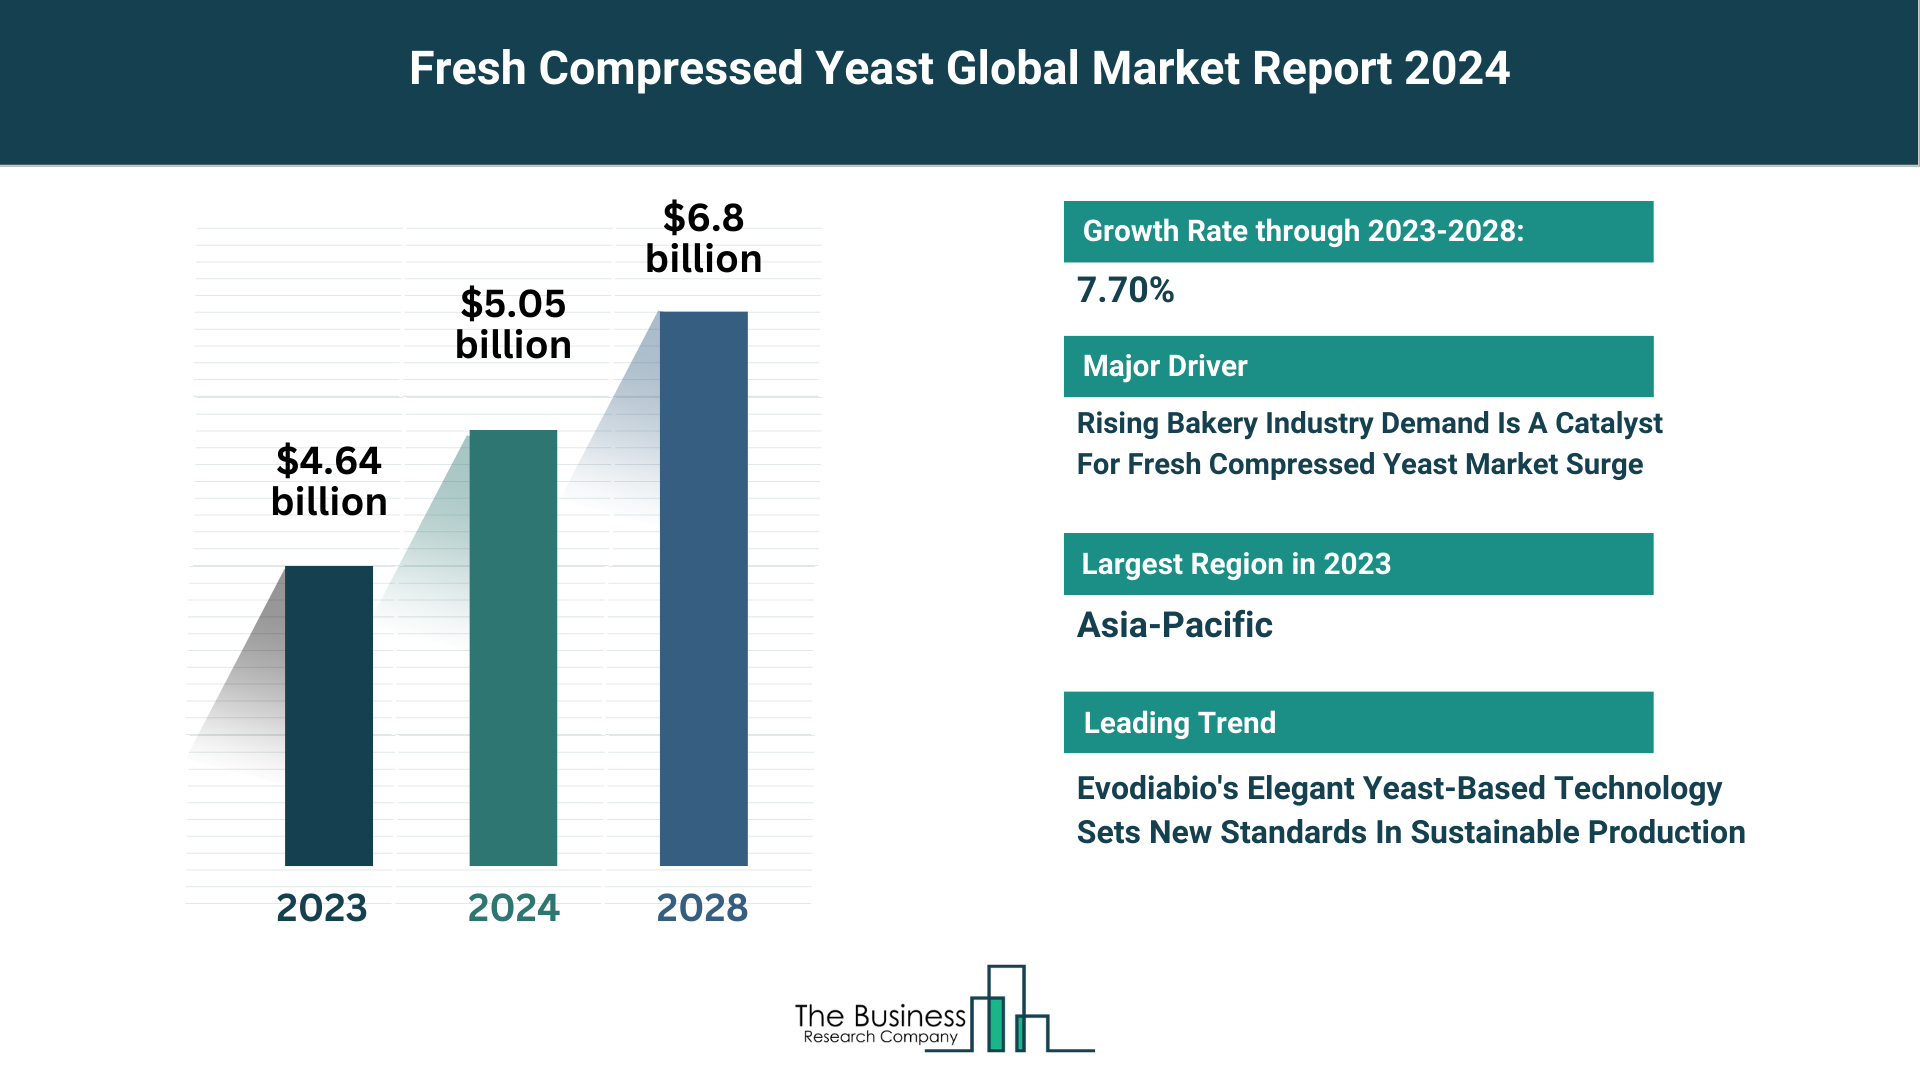 5 Key Takeaways From The Fresh Compressed Yeast Market Report 2024